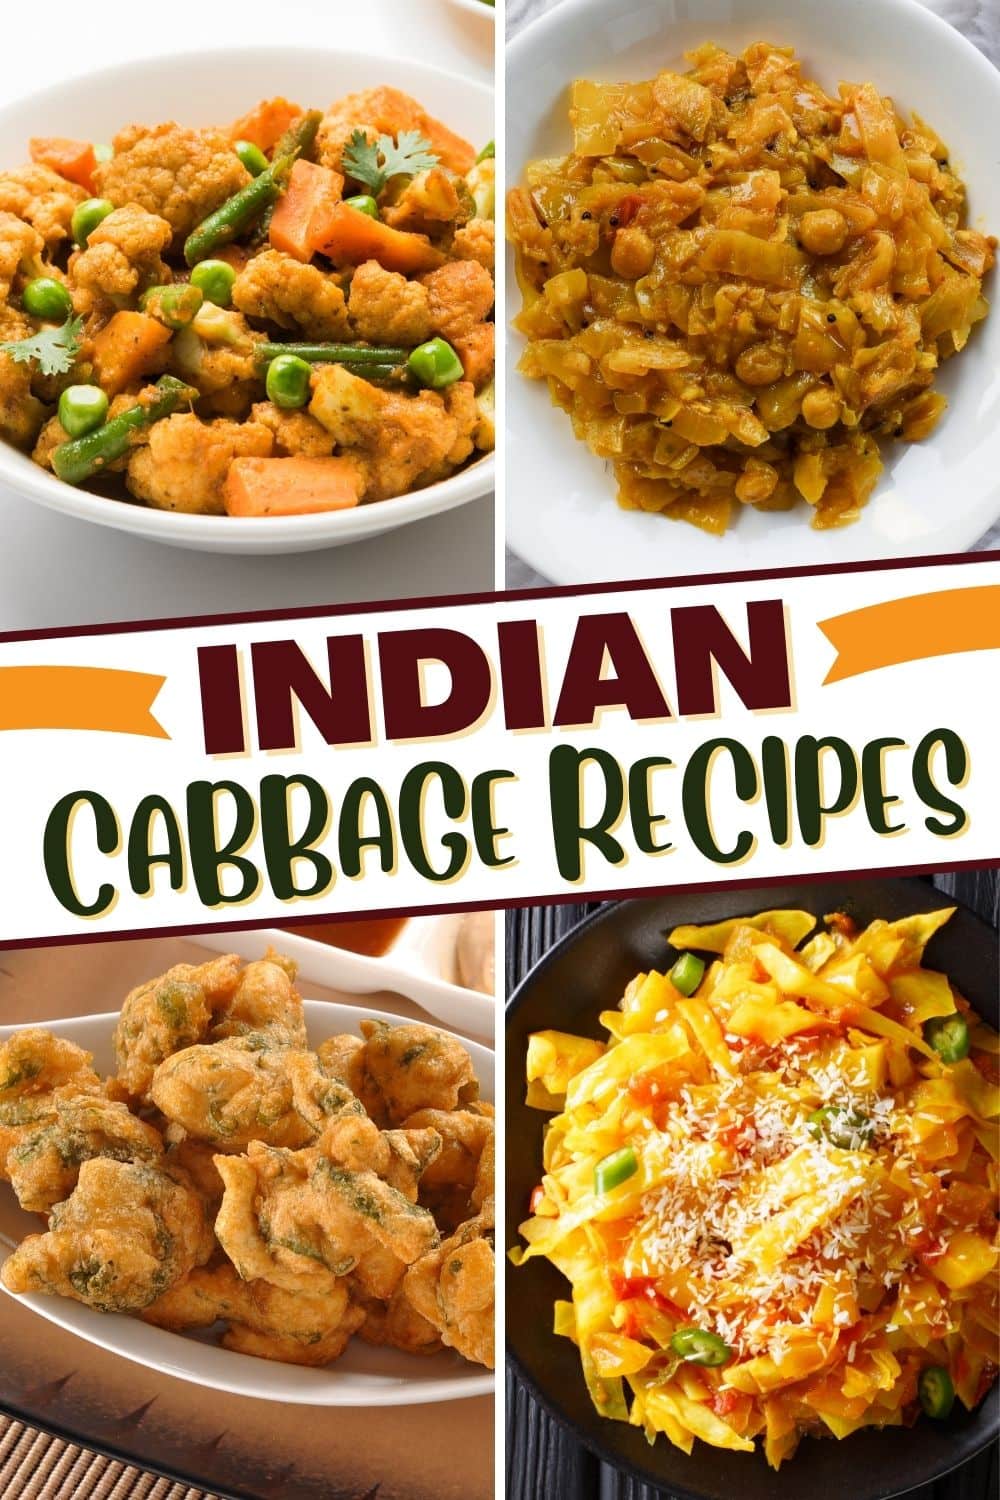 17 Indian Cabbage Recipes to Make at Home - Insanely Good